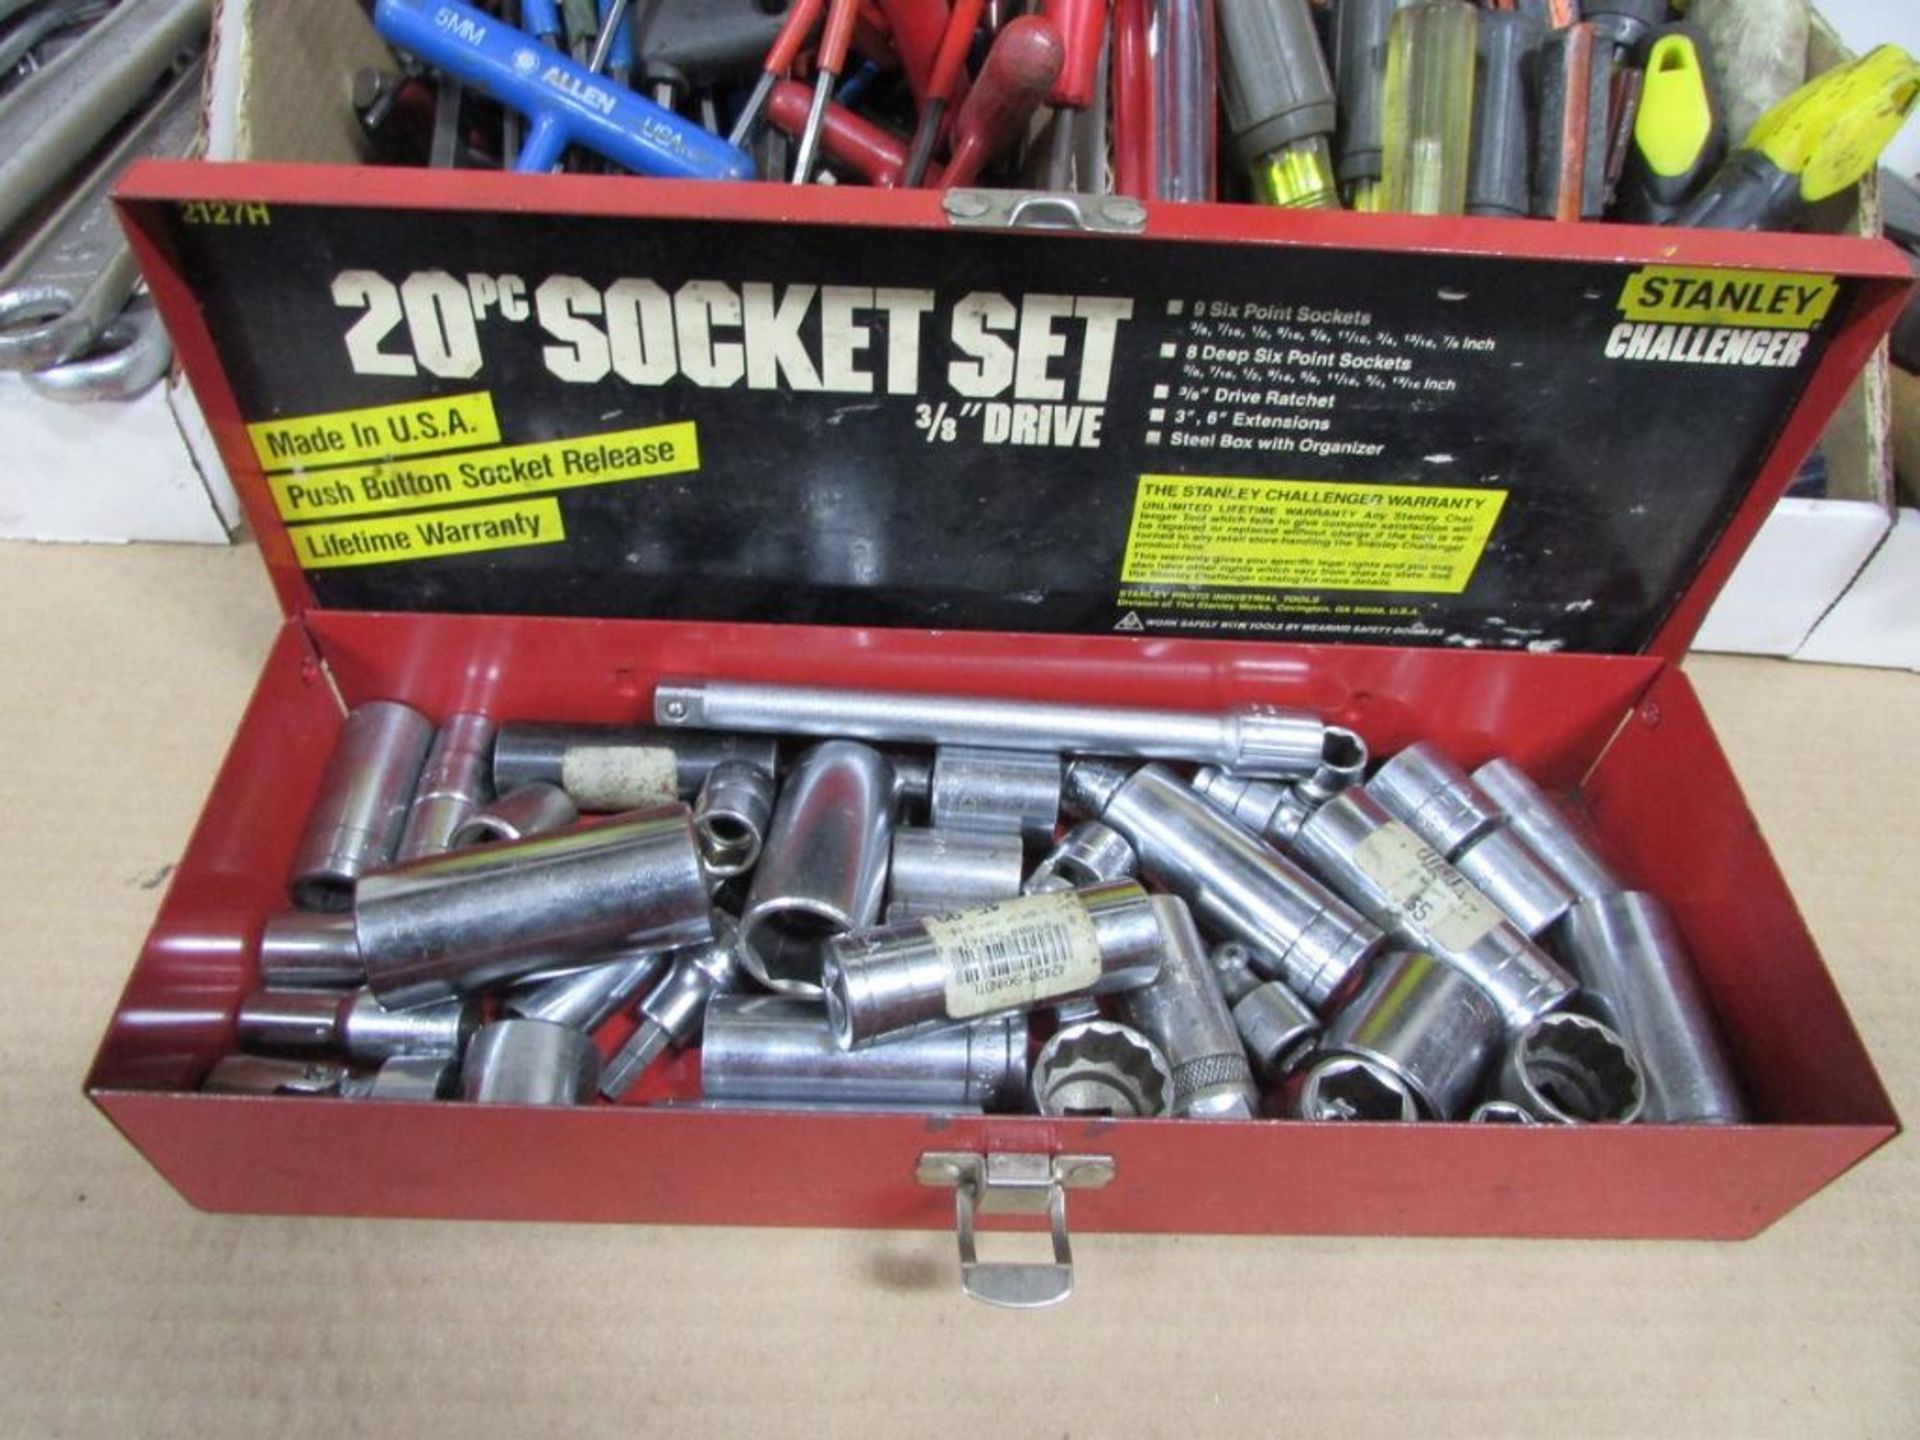 Assorted Hand Tools: Wrenches, Hammers, Files, Drivers, Allen Wrenches, Adjustable Wrenches, Ratchet - Bild 4 aus 4